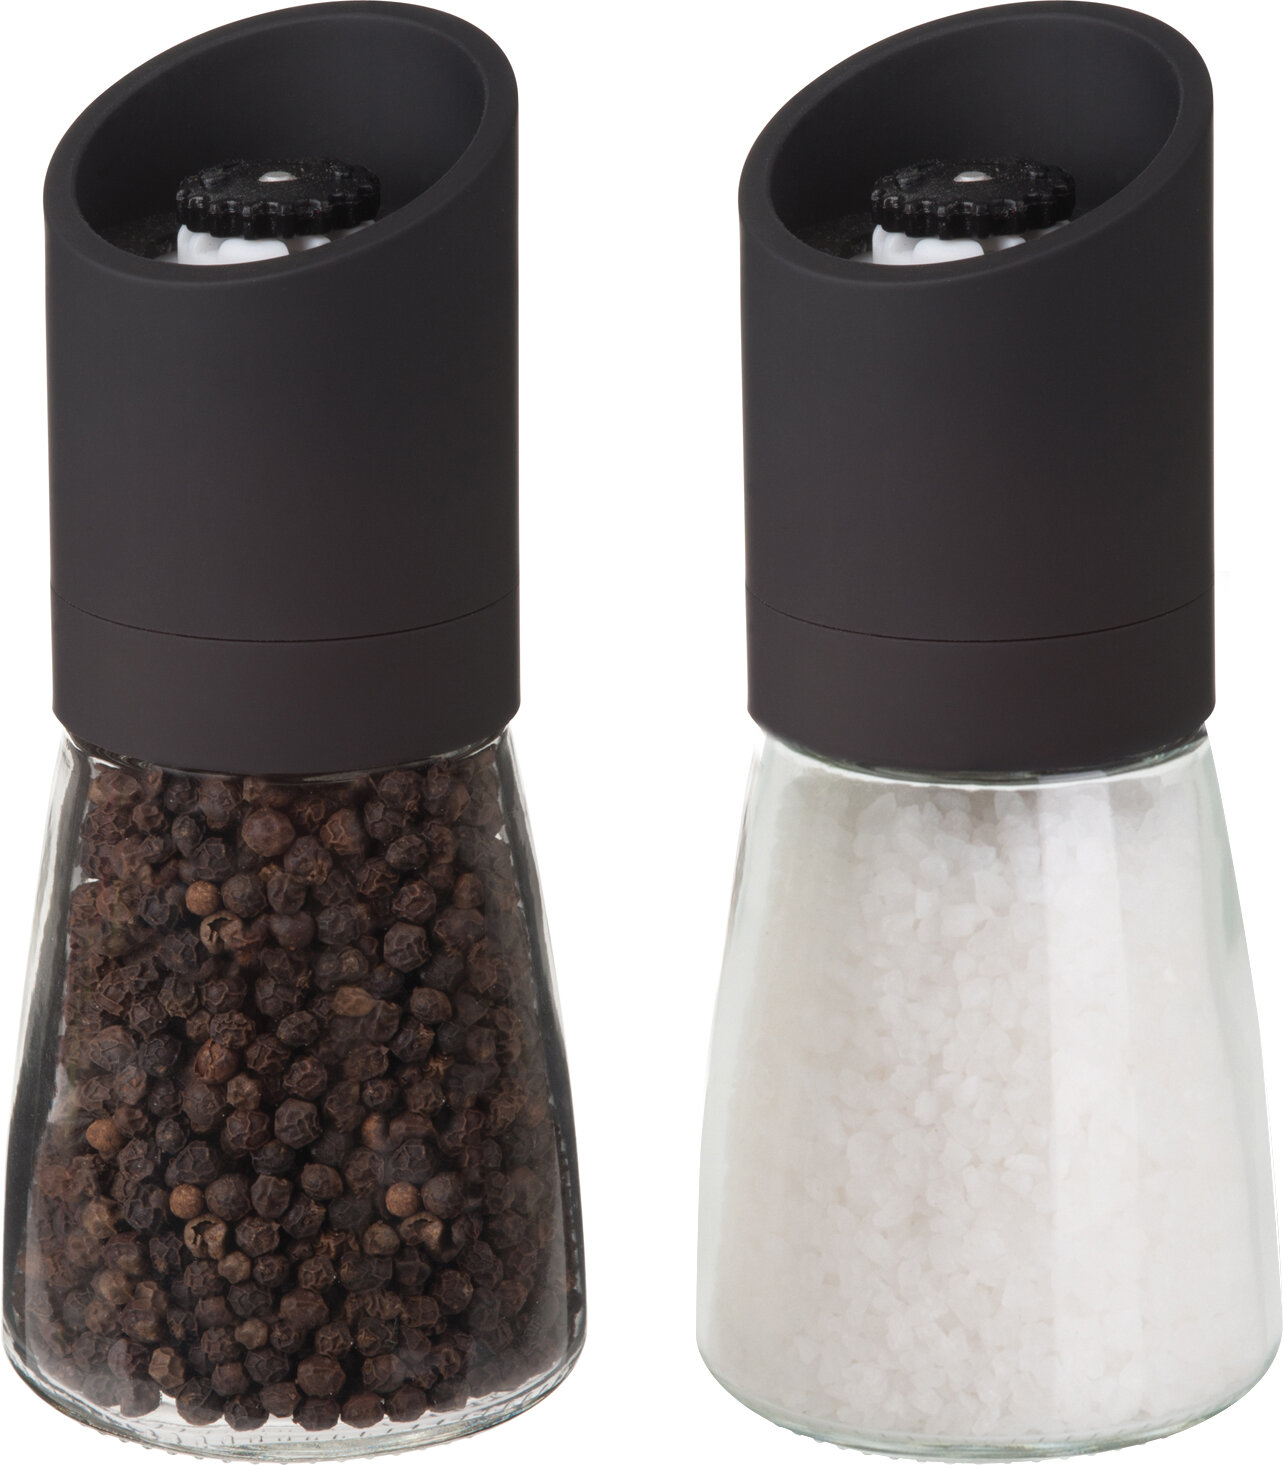 Mini Salt and Pepper Grinders - Set of 2 by Trudeau